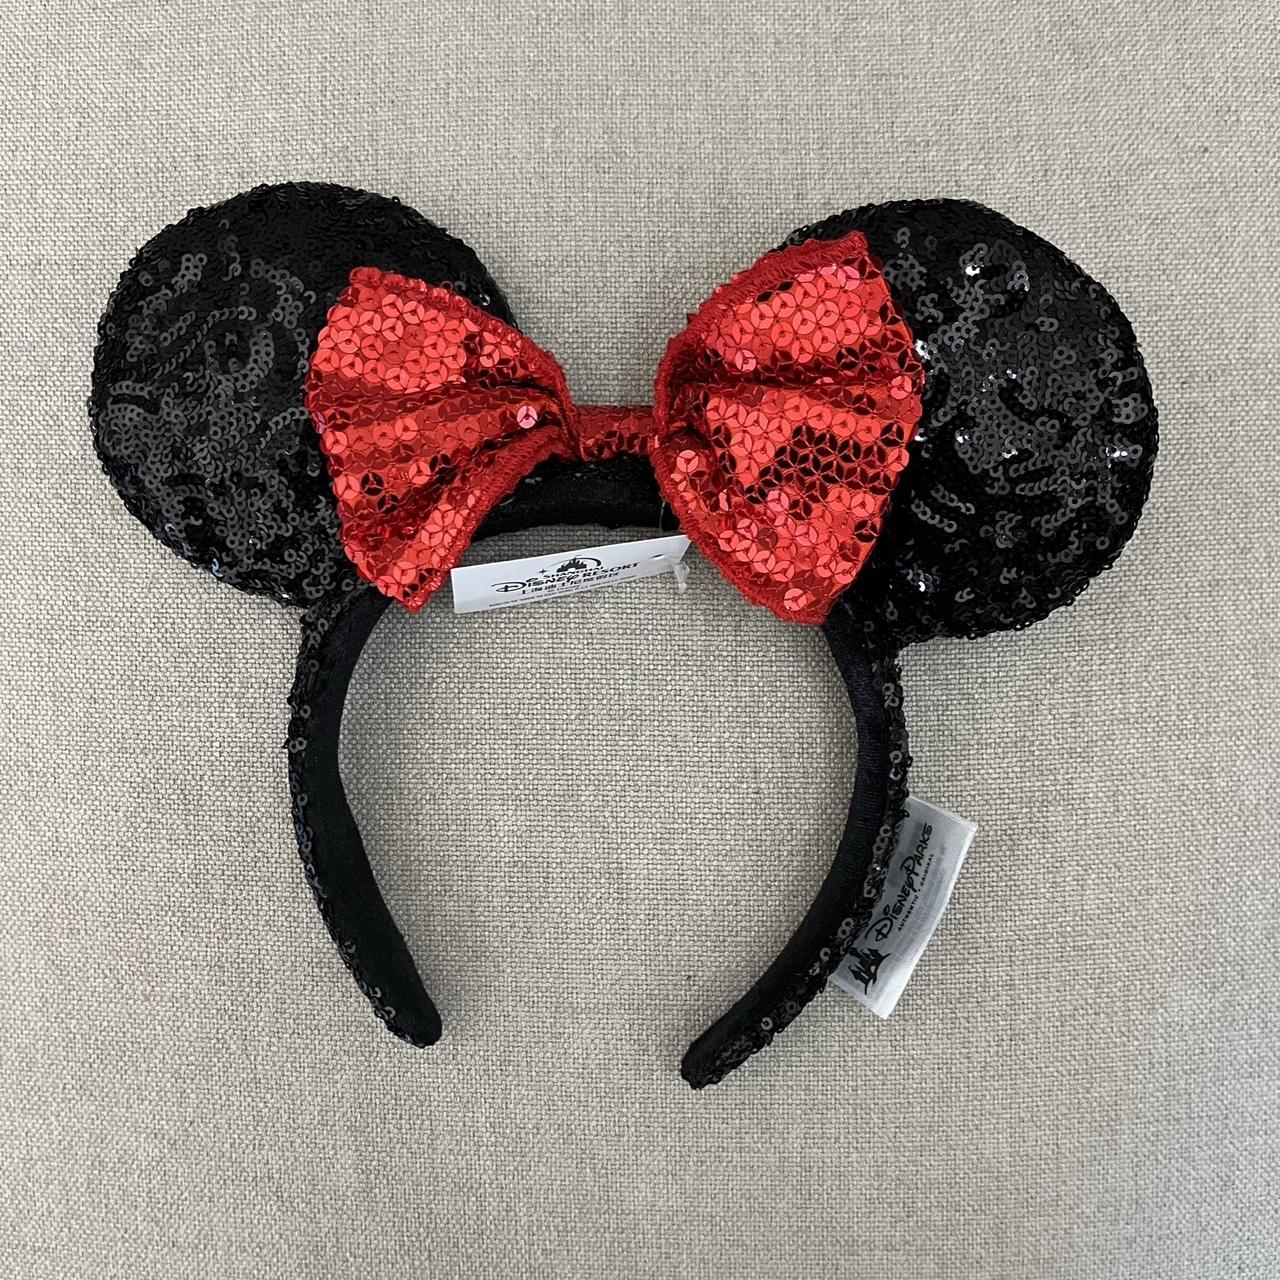 Minnie Mouse Black Hair Accessories for Women